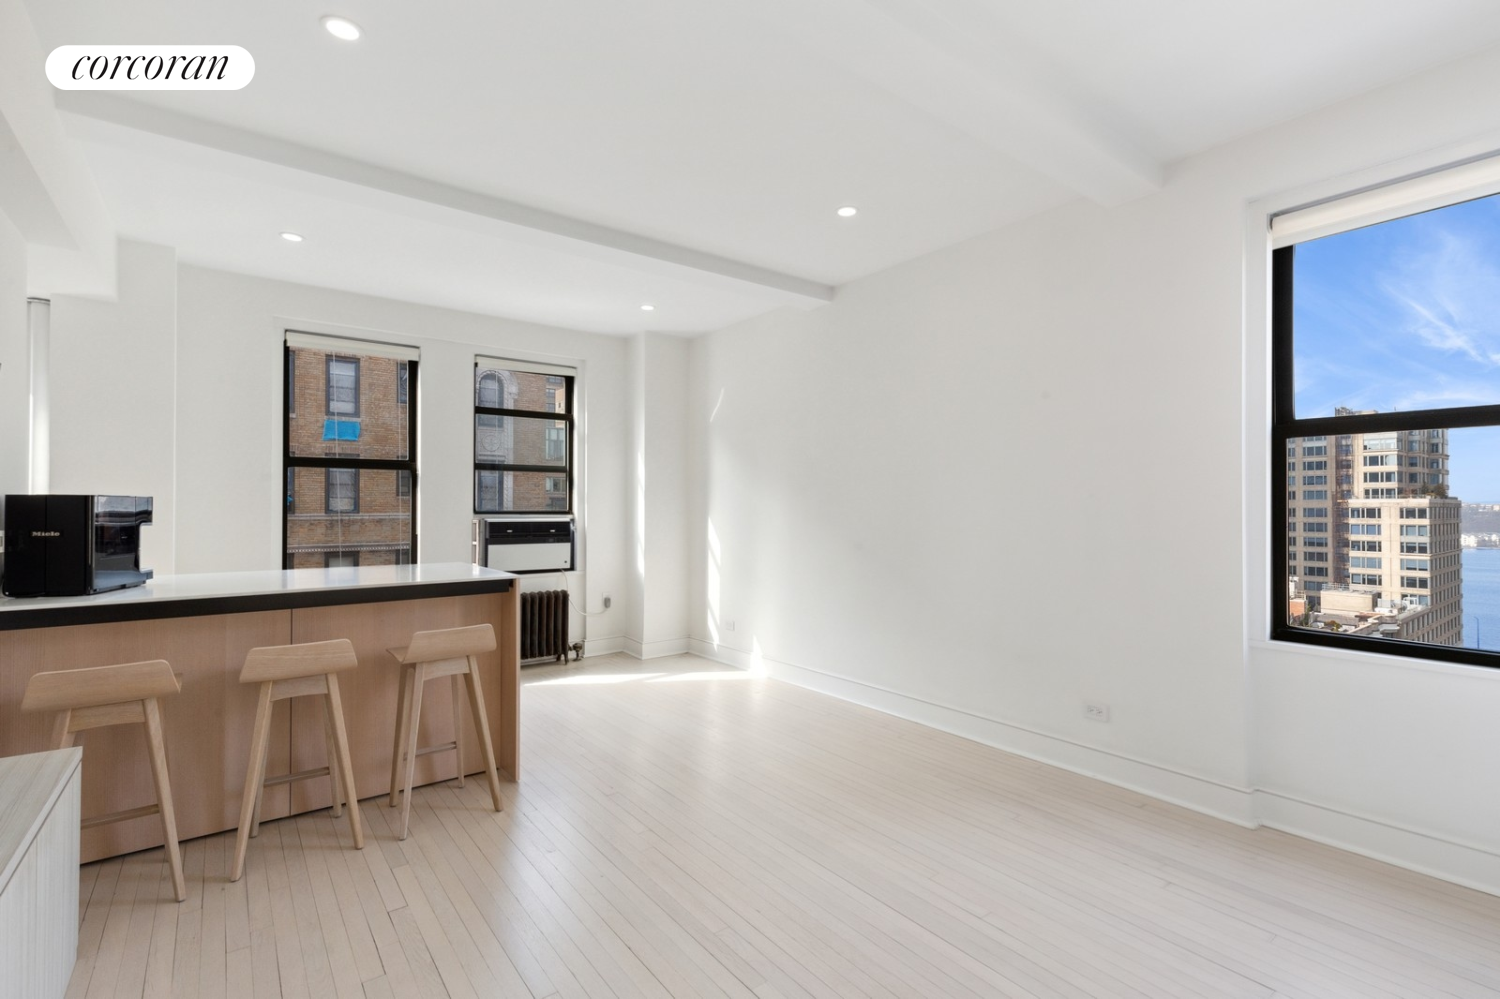 243 West End Avenue 1409, Lincoln Sq, Upper West Side, NYC - 1 Bathrooms  
2 Rooms - 